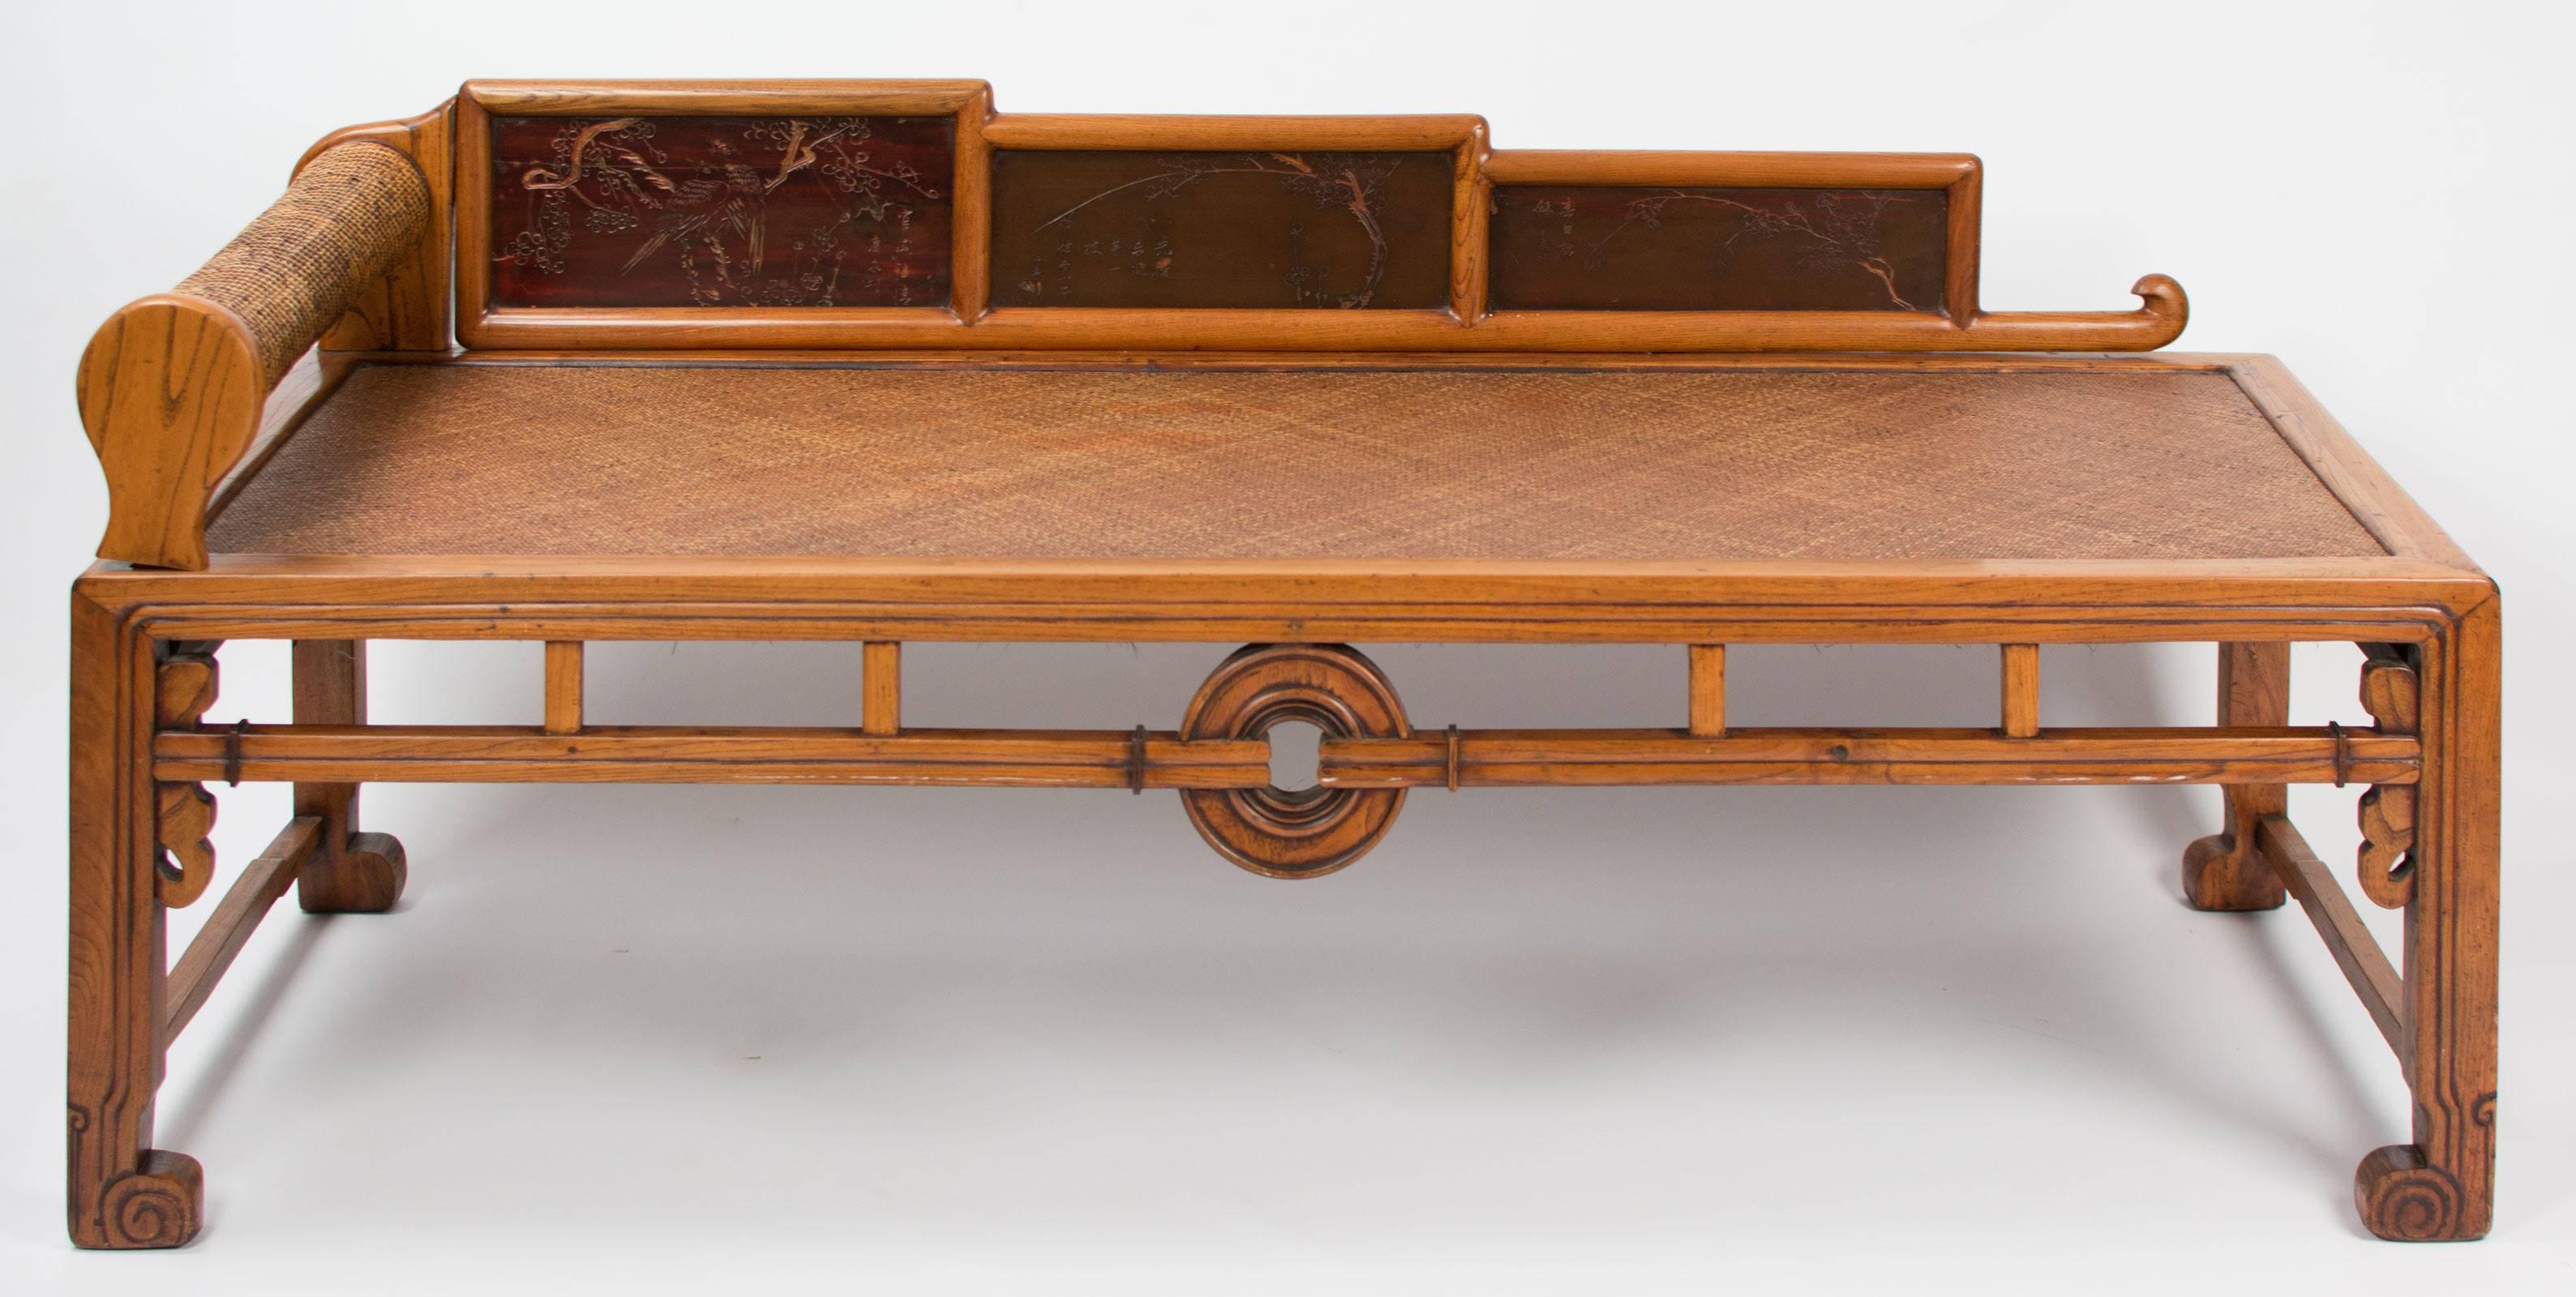 A Chinese elm opium bed with lacquer panels, circa 1880.